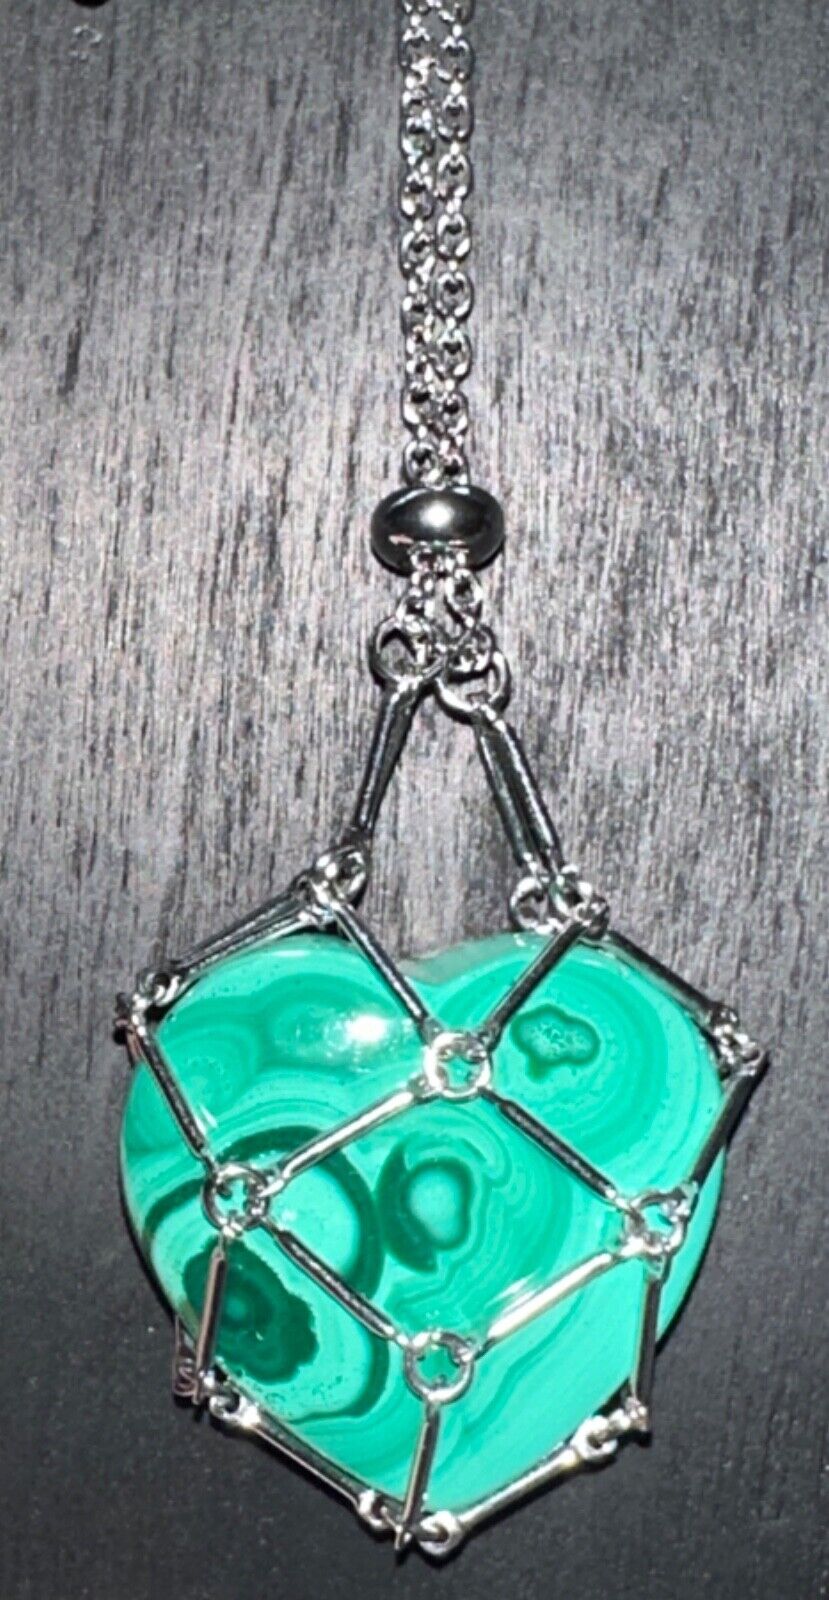 Malachite Heart Carving Cage Necklace,Quartz Crystal Jewelry,Metaphysical,Gem